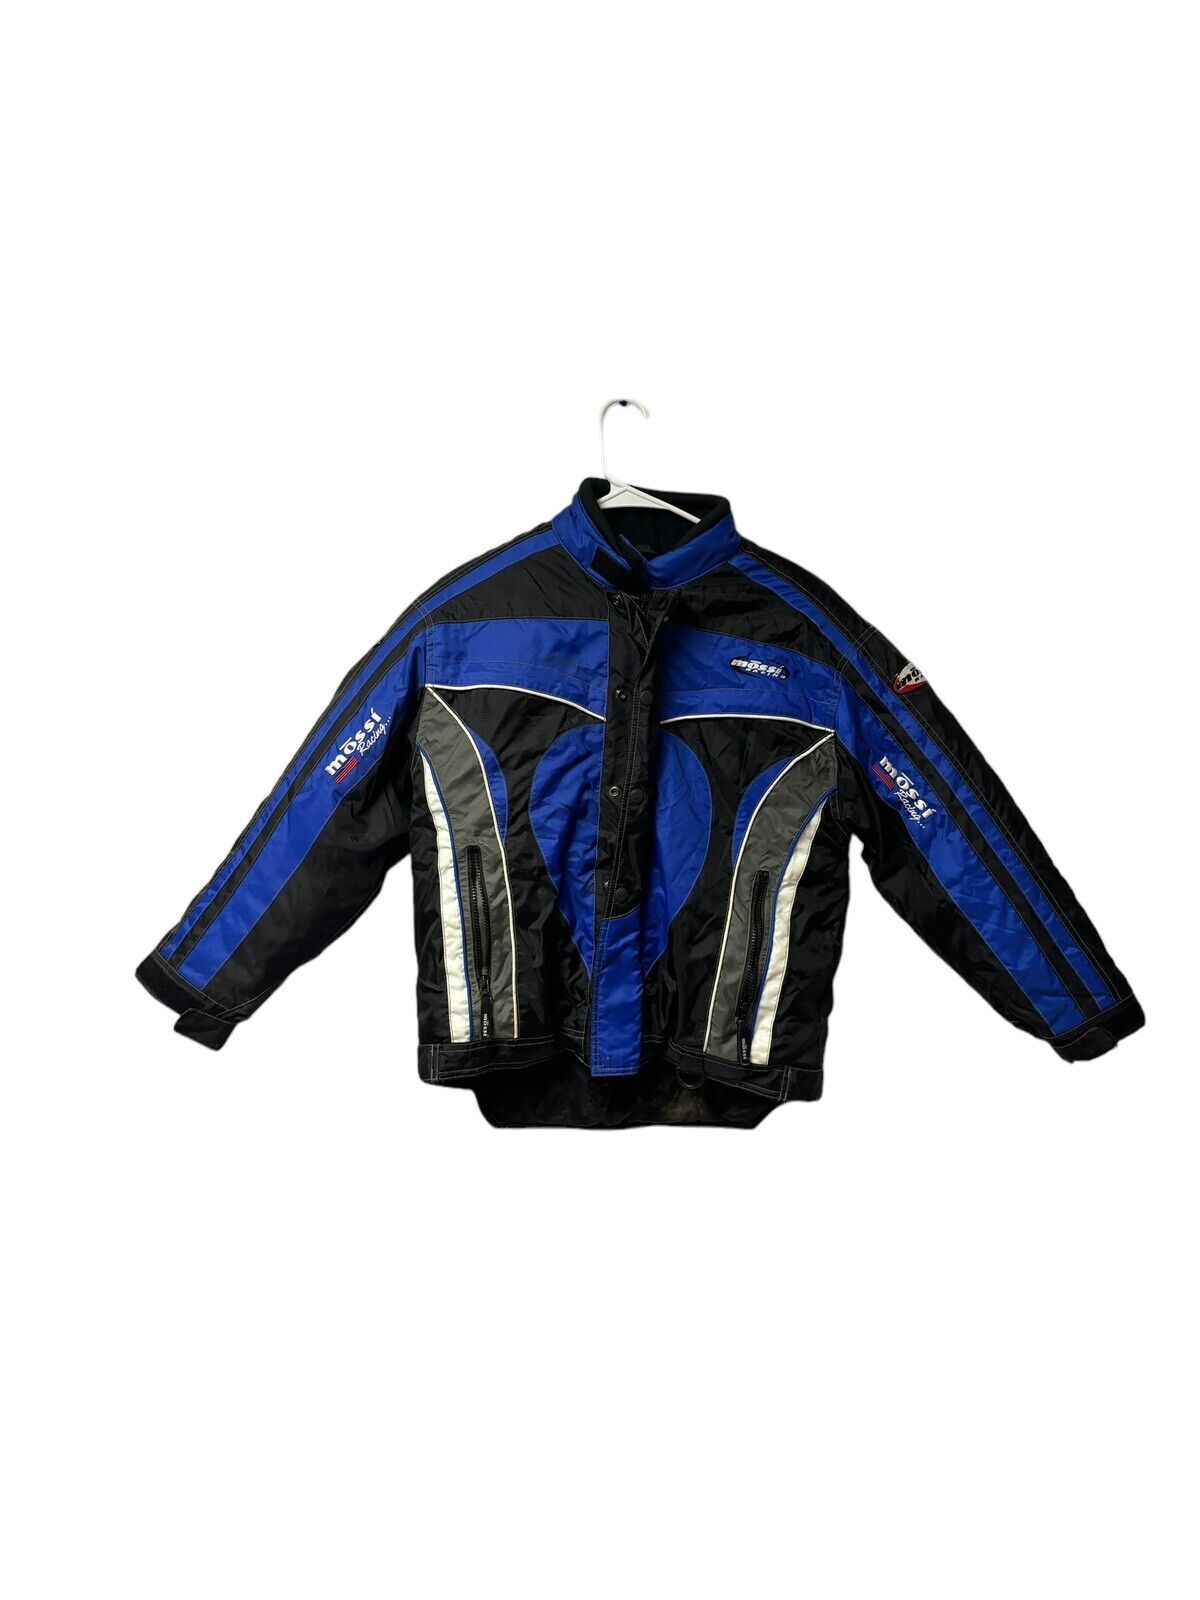 Mossi Racing Motorsports Women’s 12 Thick Blue Black Jacket STAINS